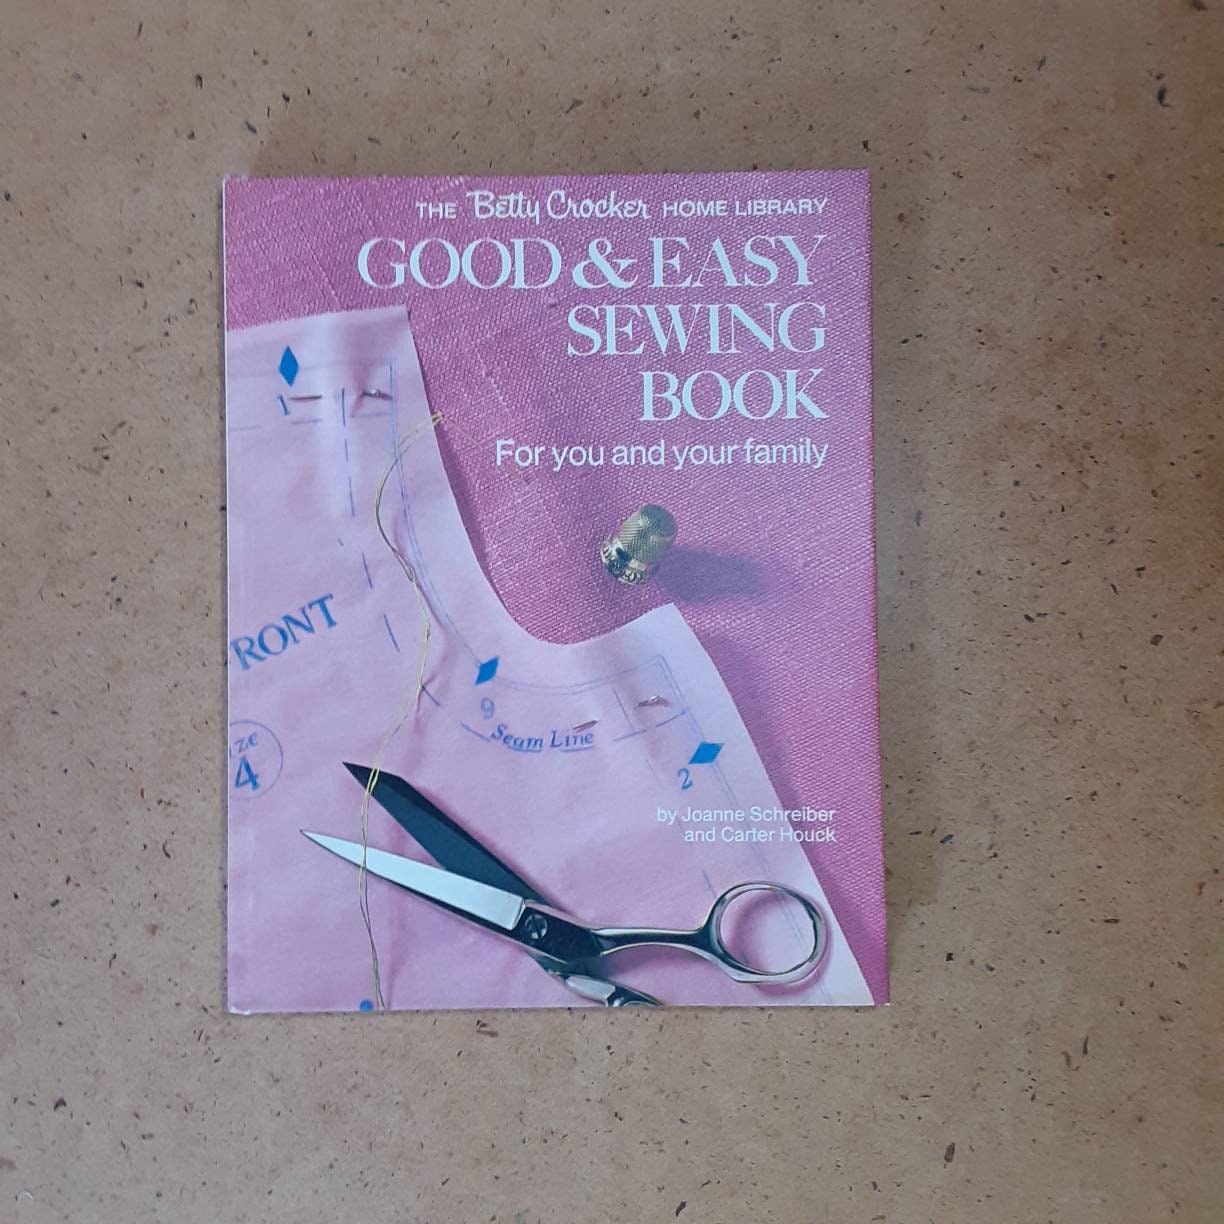 Vintage Good & Easy Sewing Book, 1972 Betty Crocker's Library